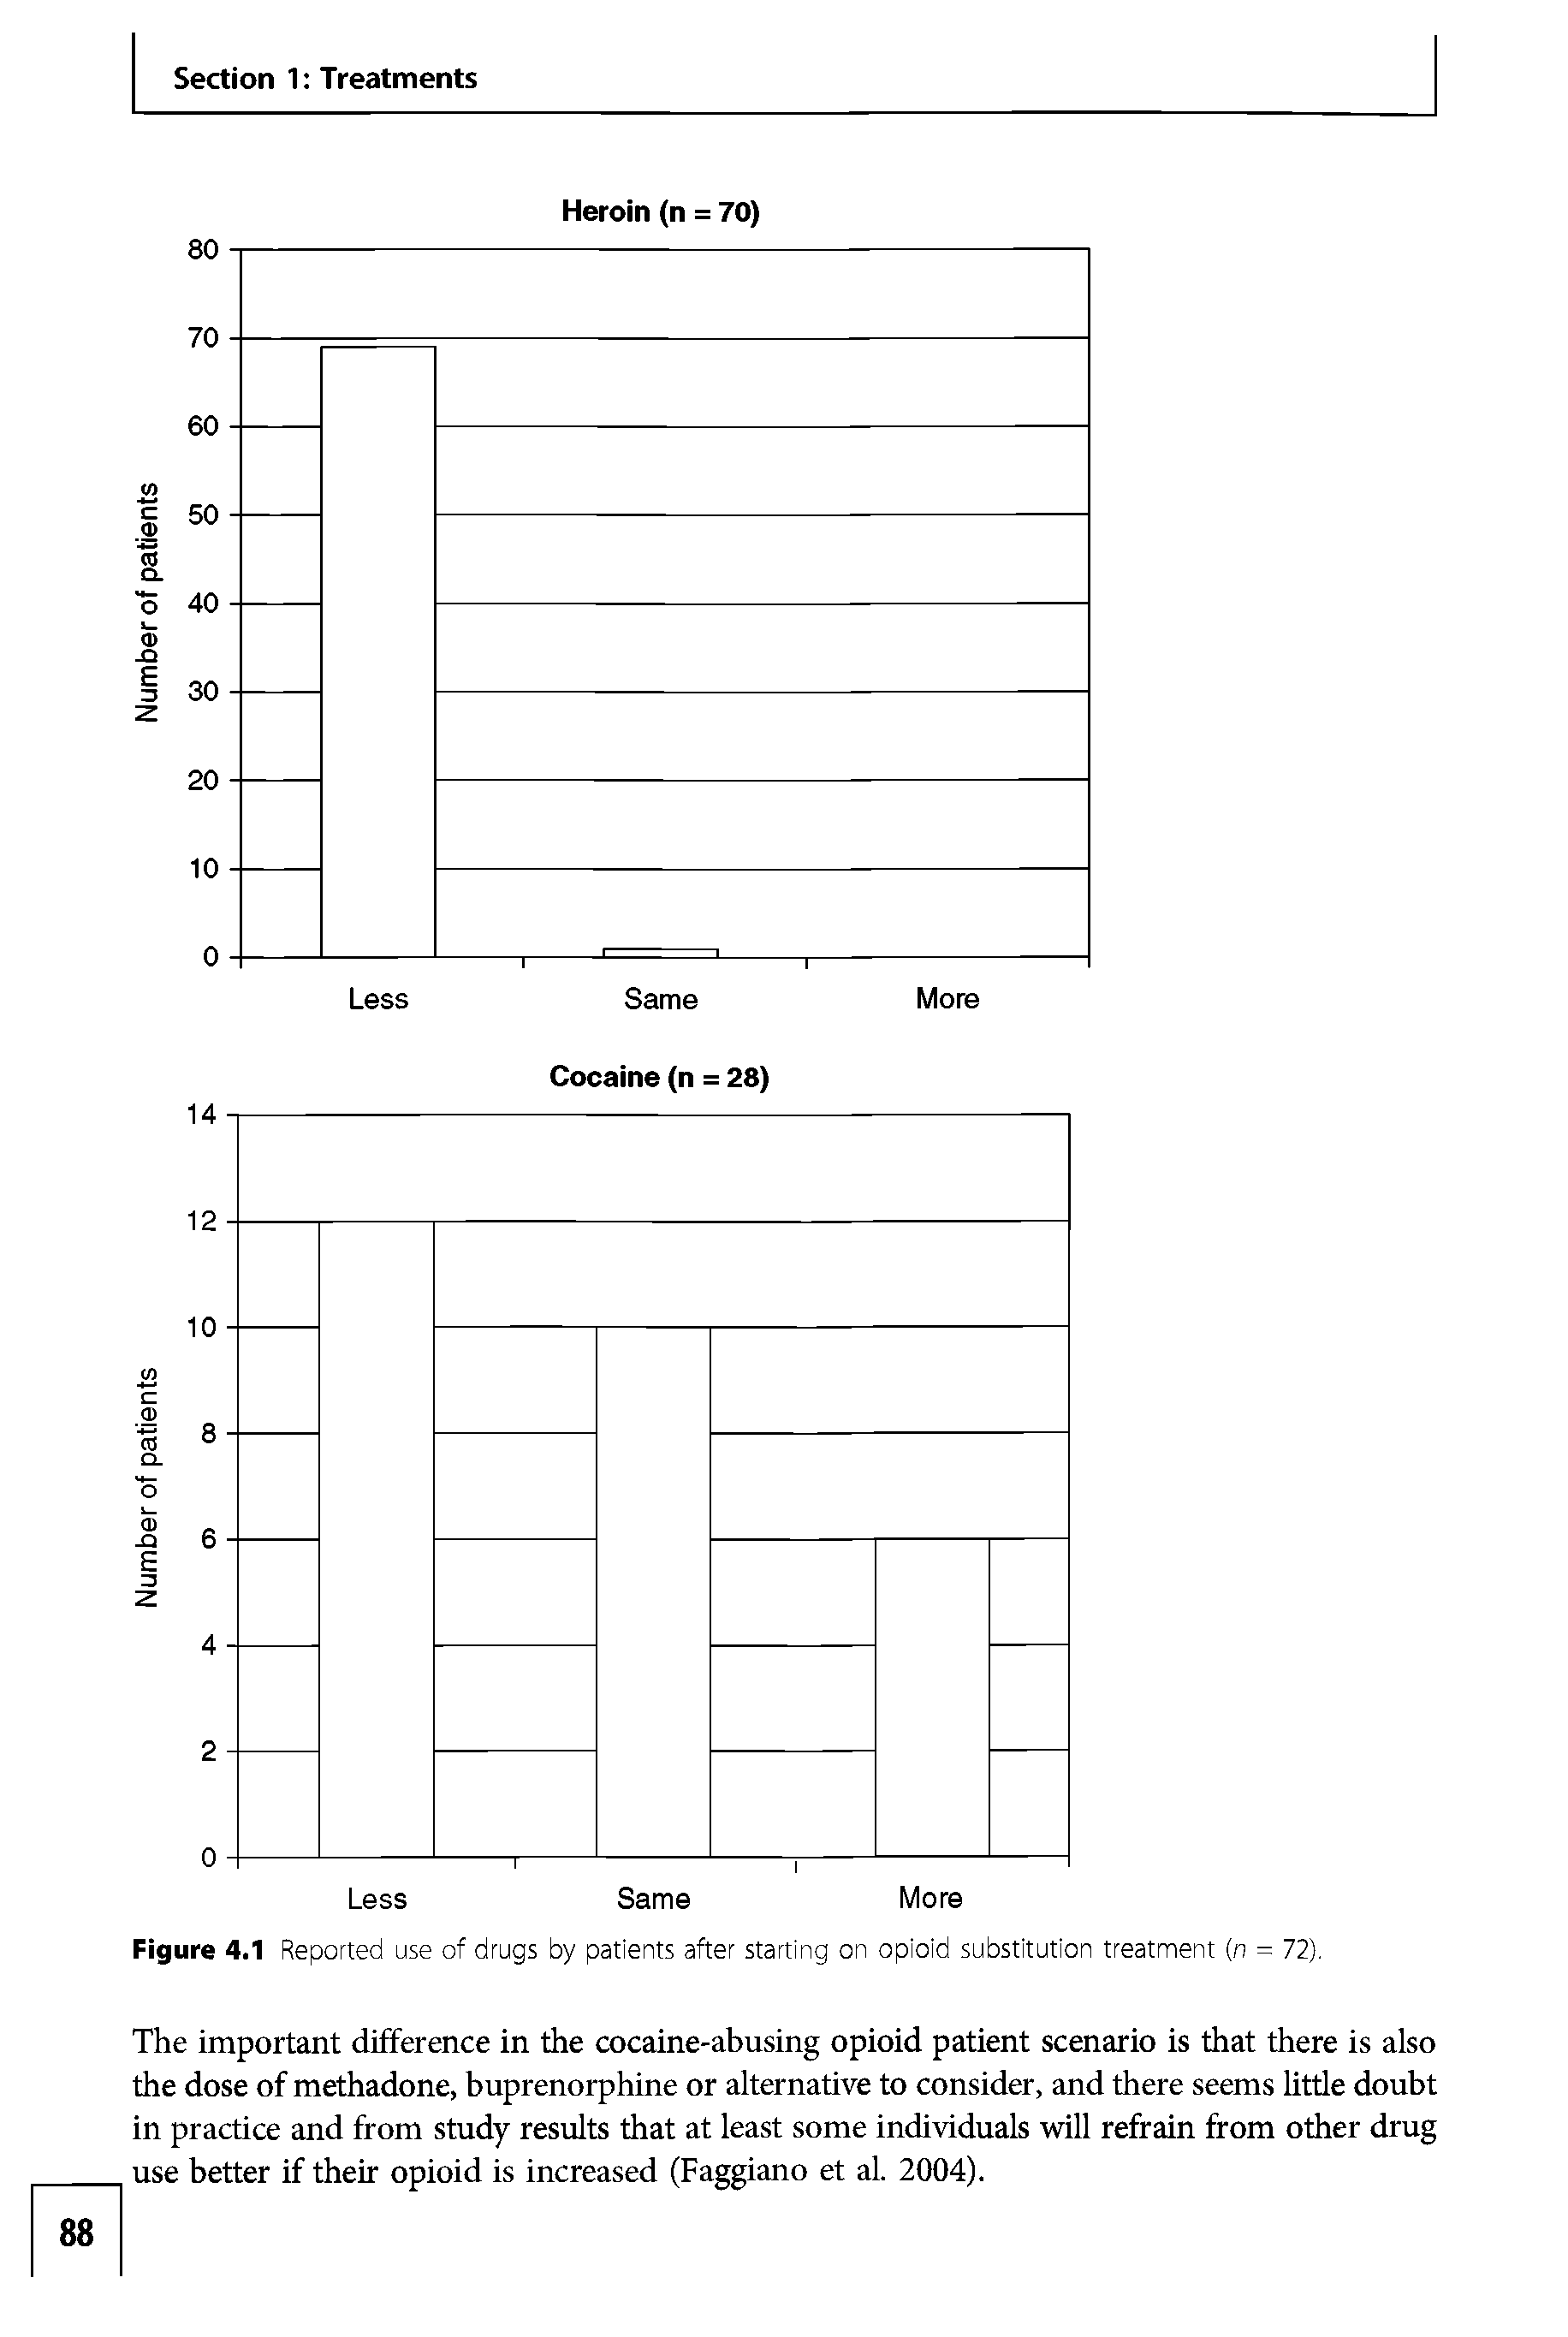 Figure 4.1 Reported use of drugs by patients after starting on opioid substitution treatment (n = 72).